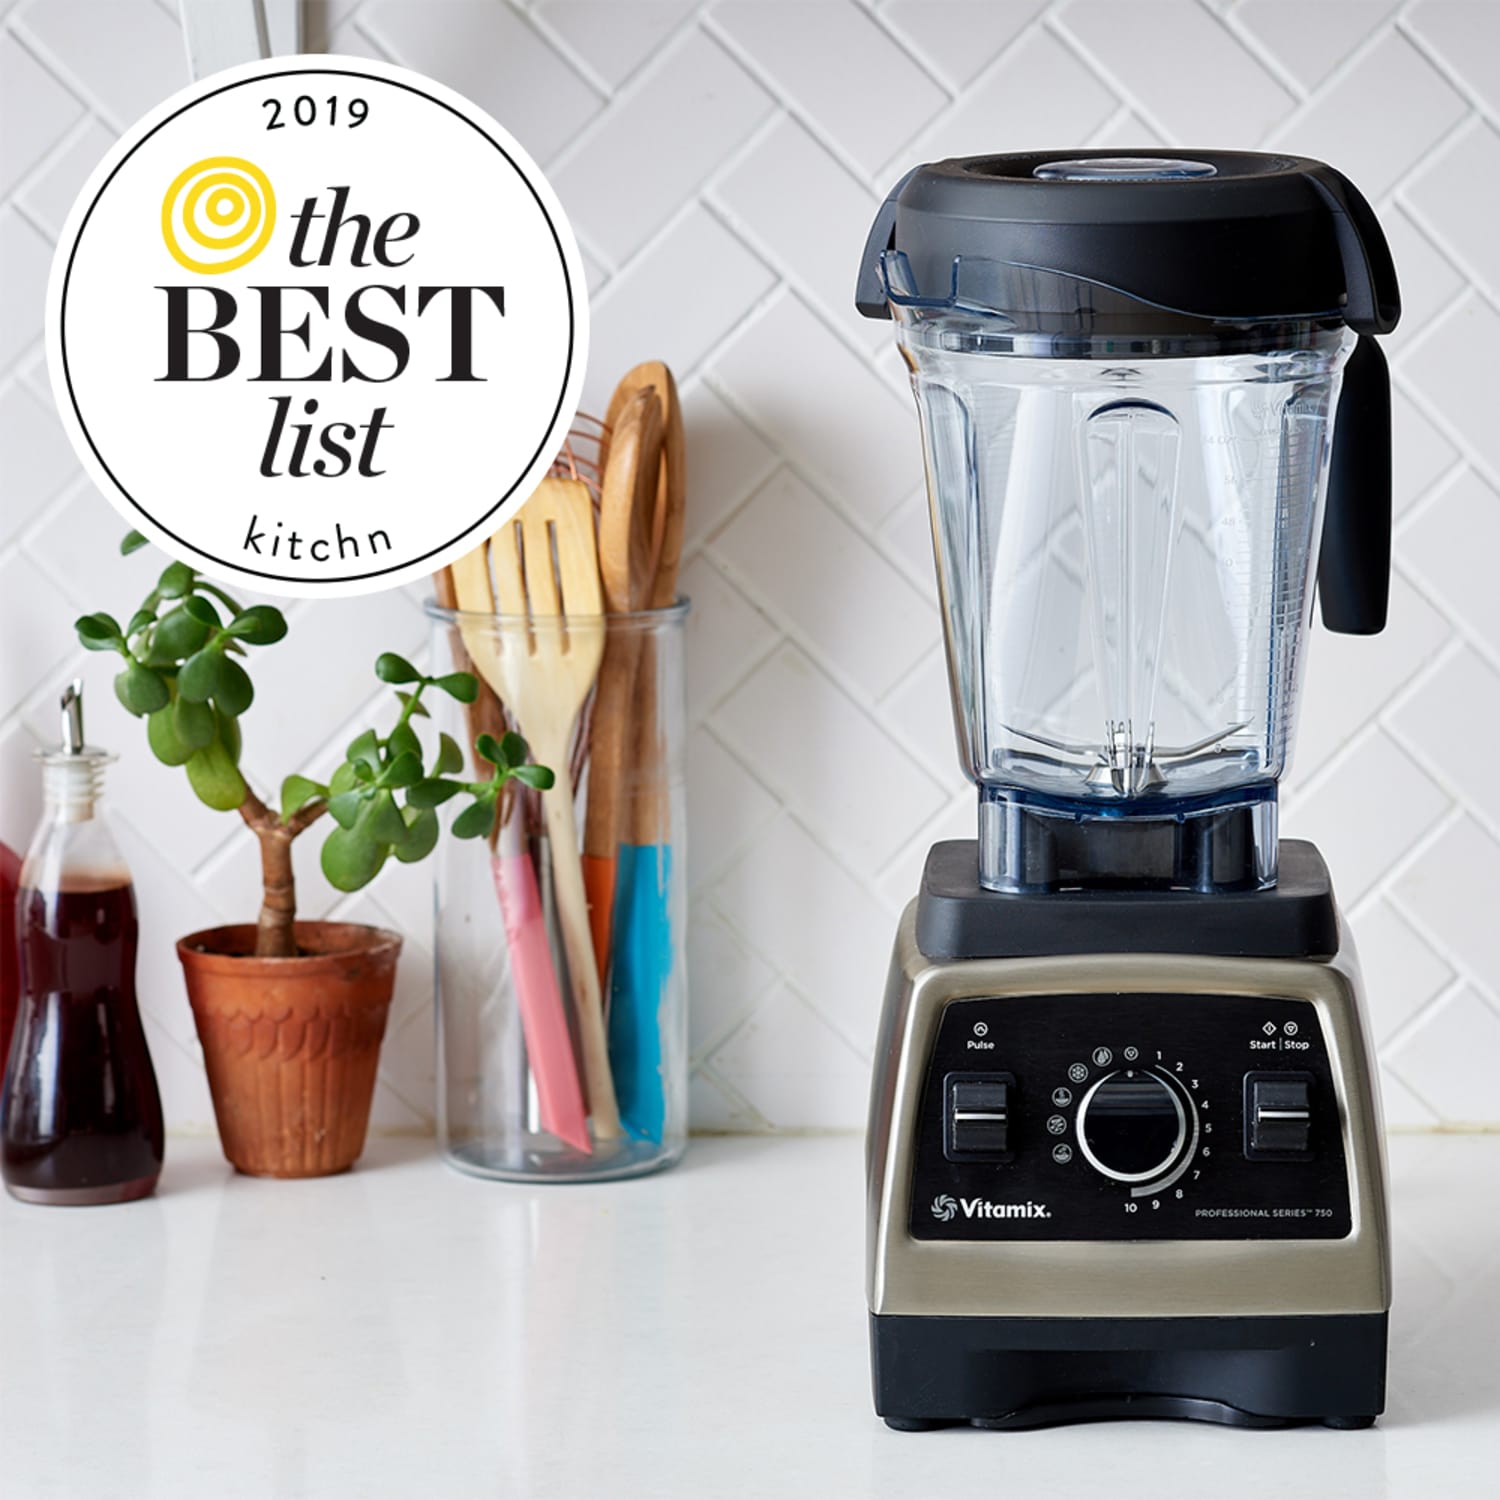 Best Blenders To Buy In 2019 On Budget | Kitchn